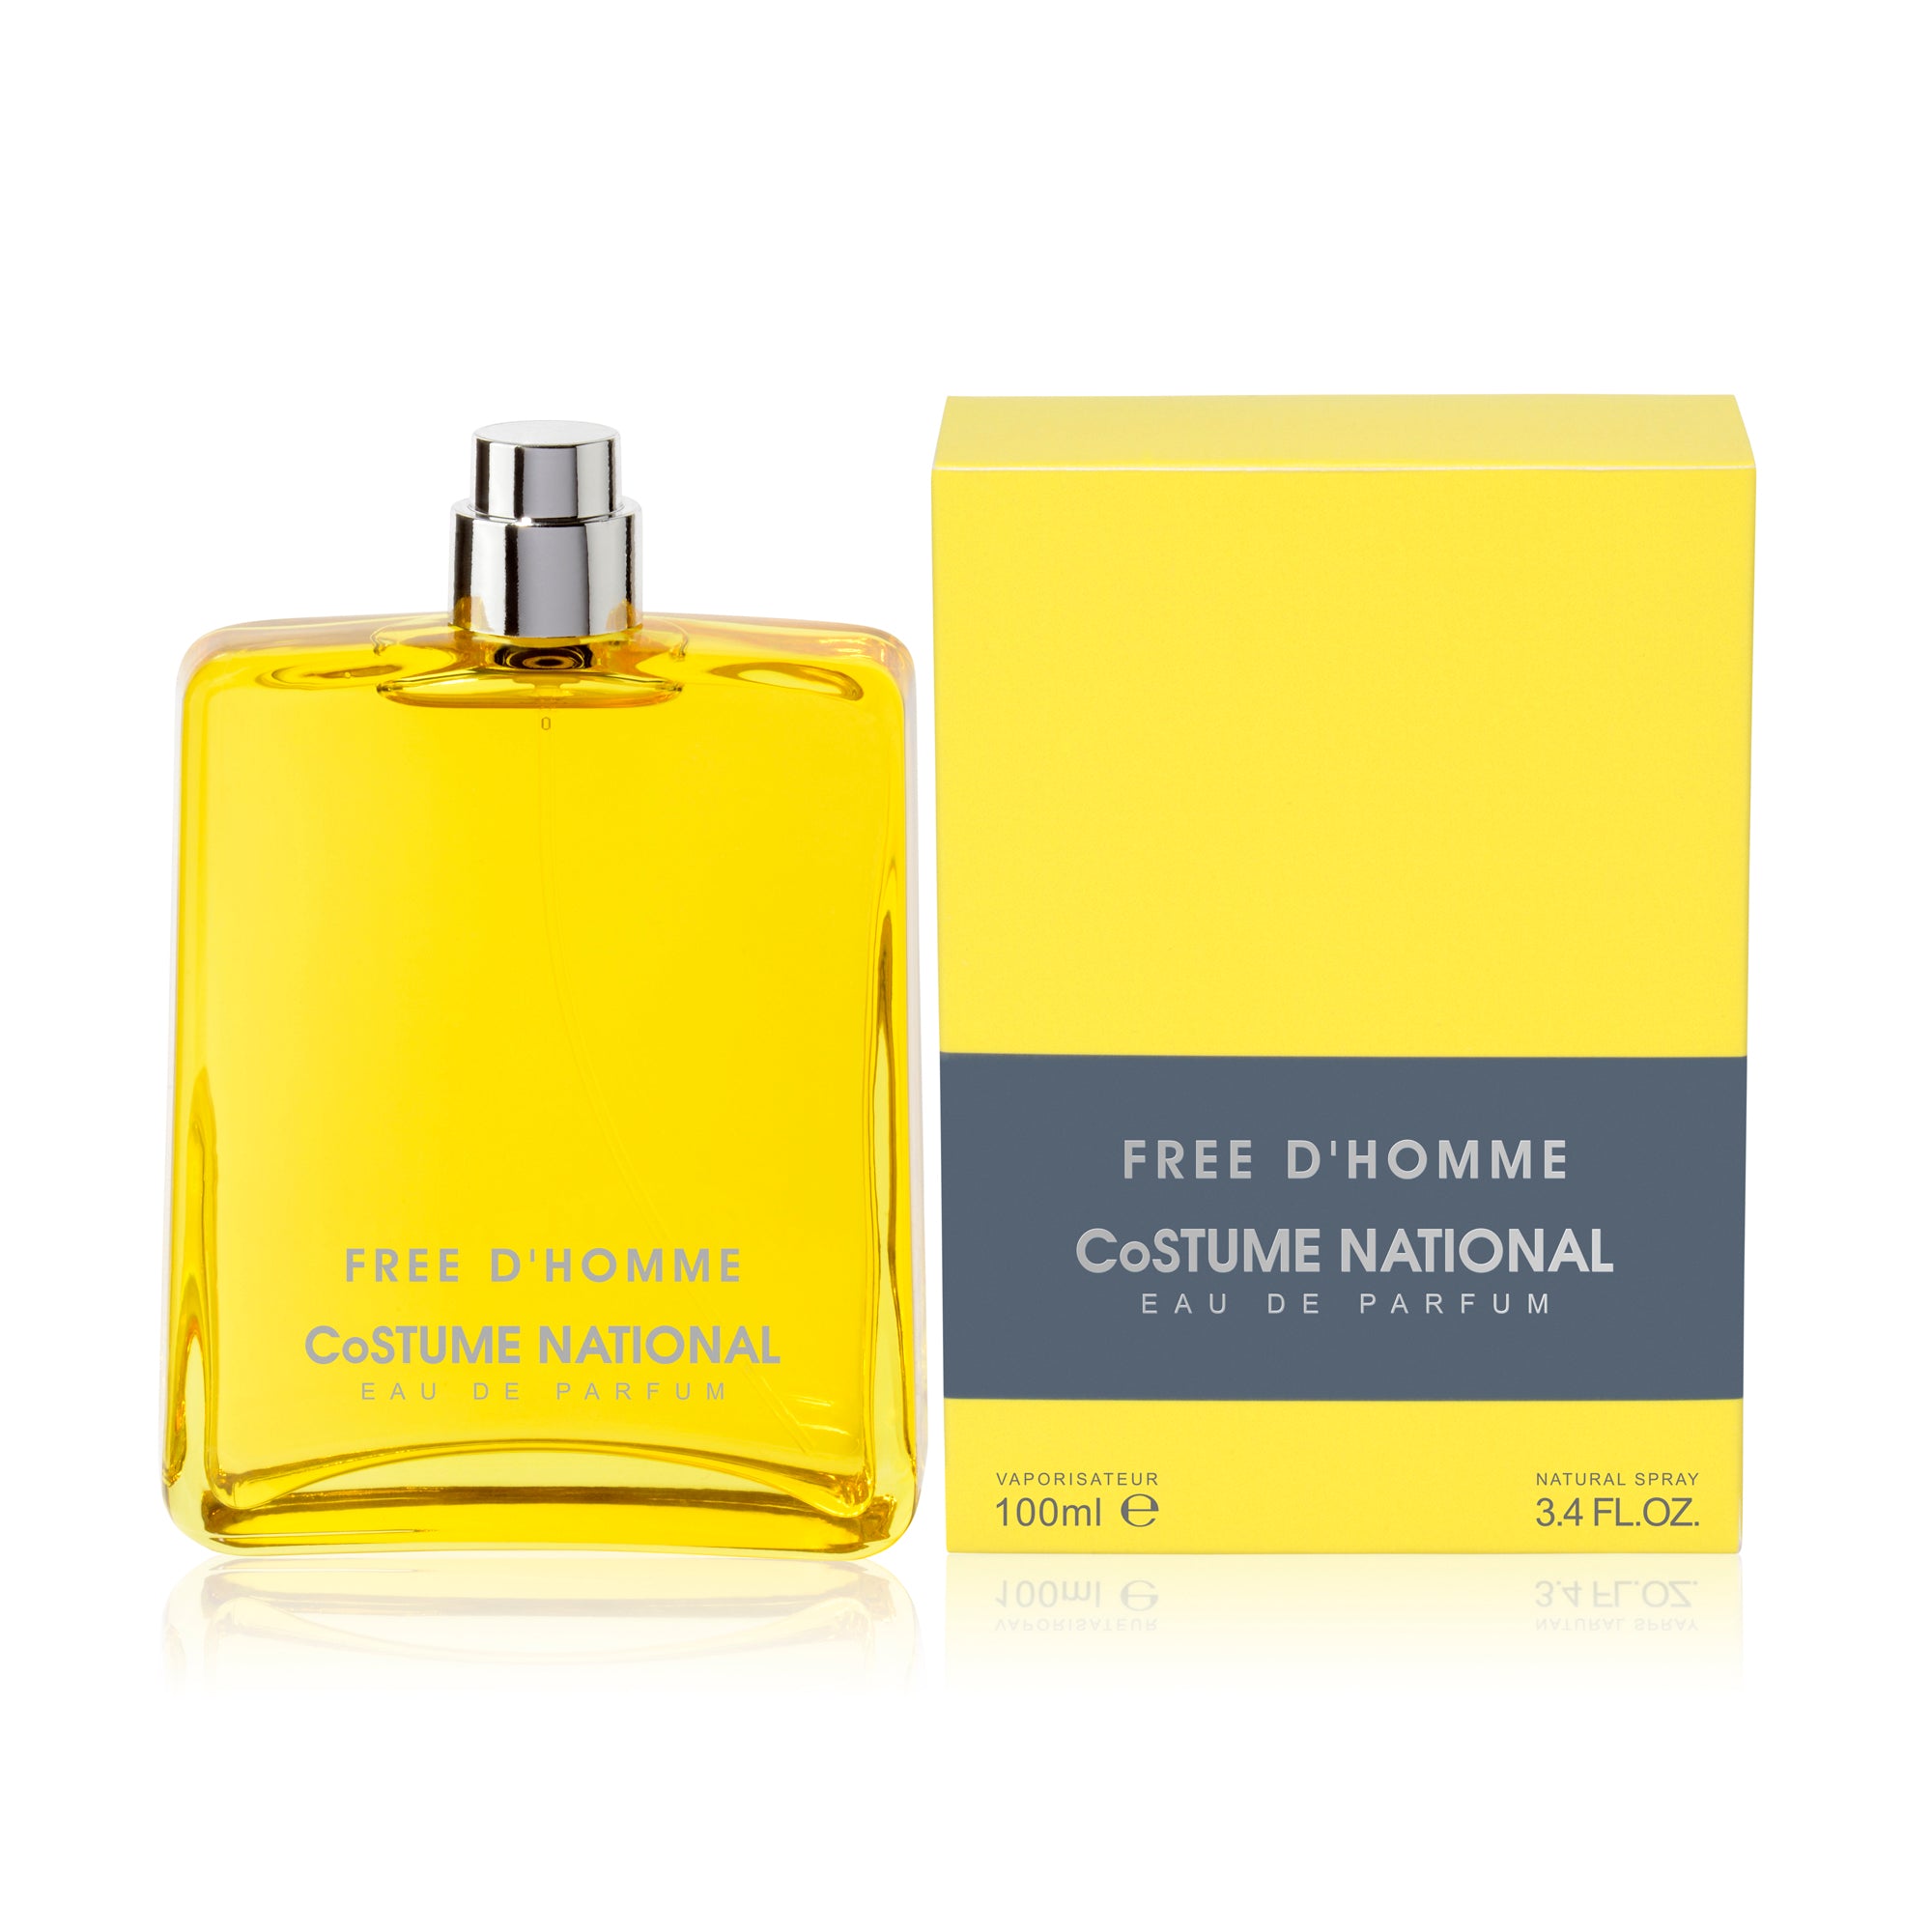 Costume National – Free d'Homme